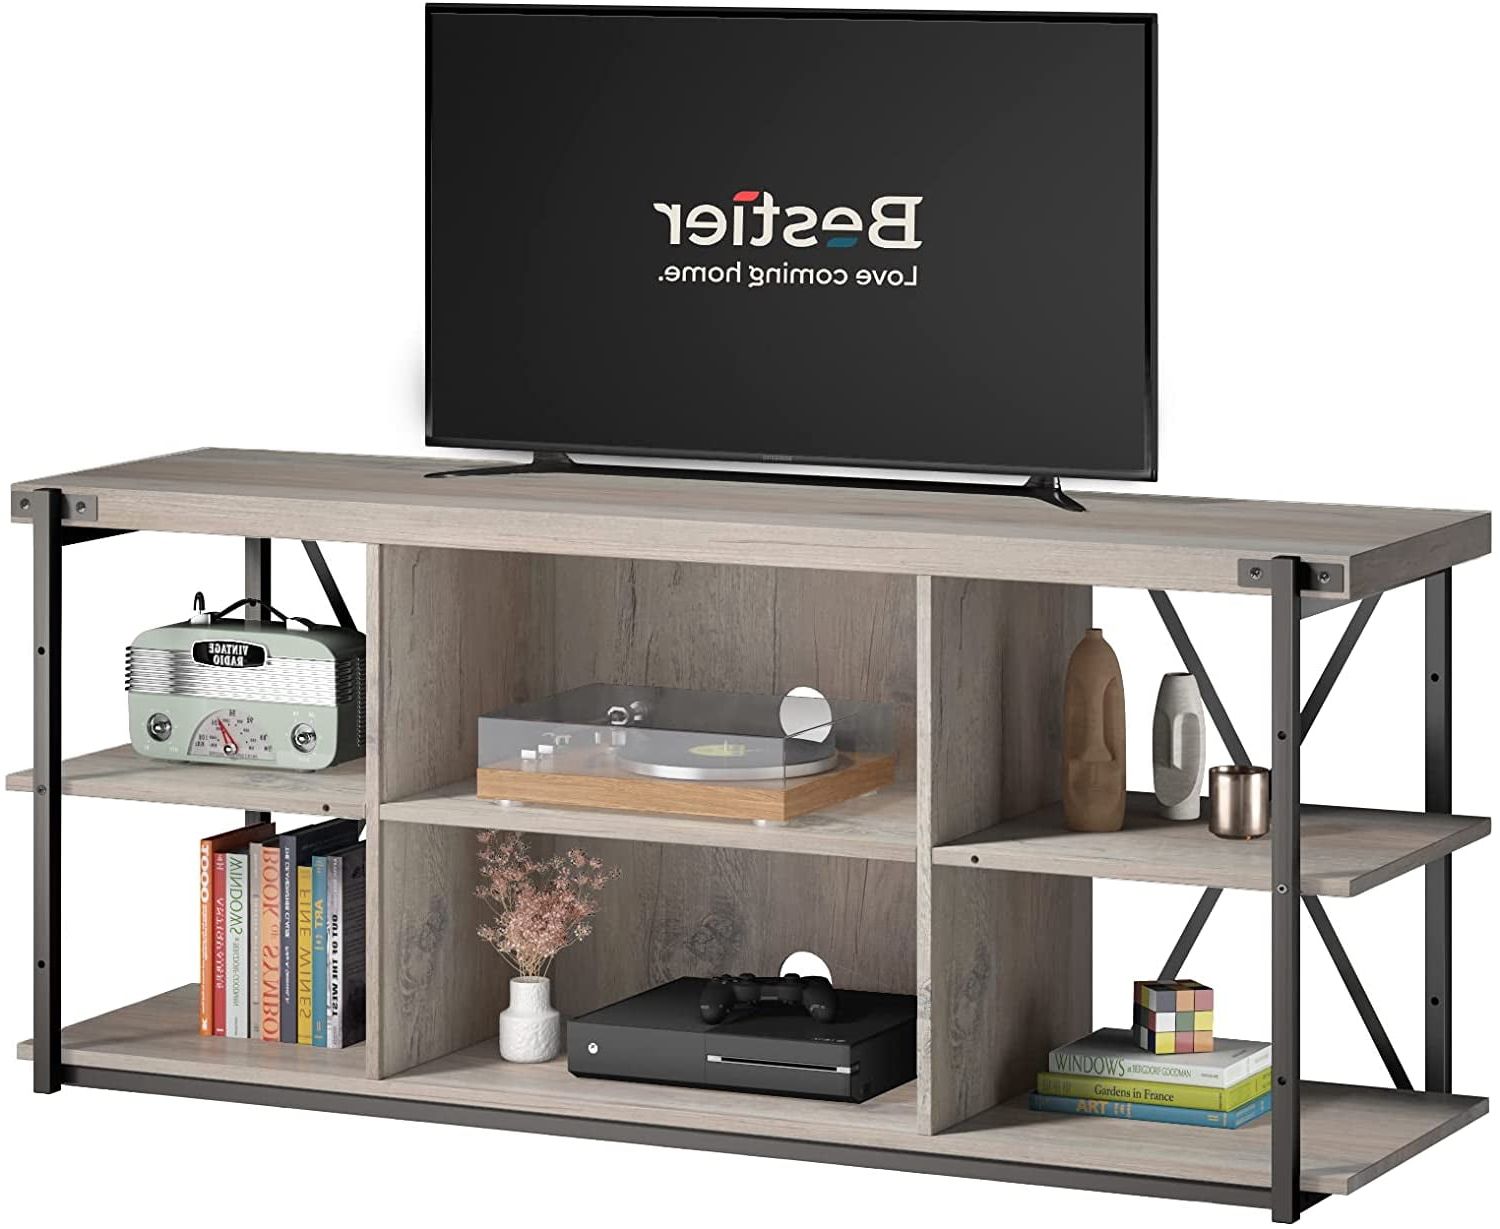 Bestier Tv Stand For Tvs Up To 75" Intended For Newest Bestier Farmhouse Tv Stand With Storage Shelves For Tvs Up To 65", Wash (Photo 7 of 15)